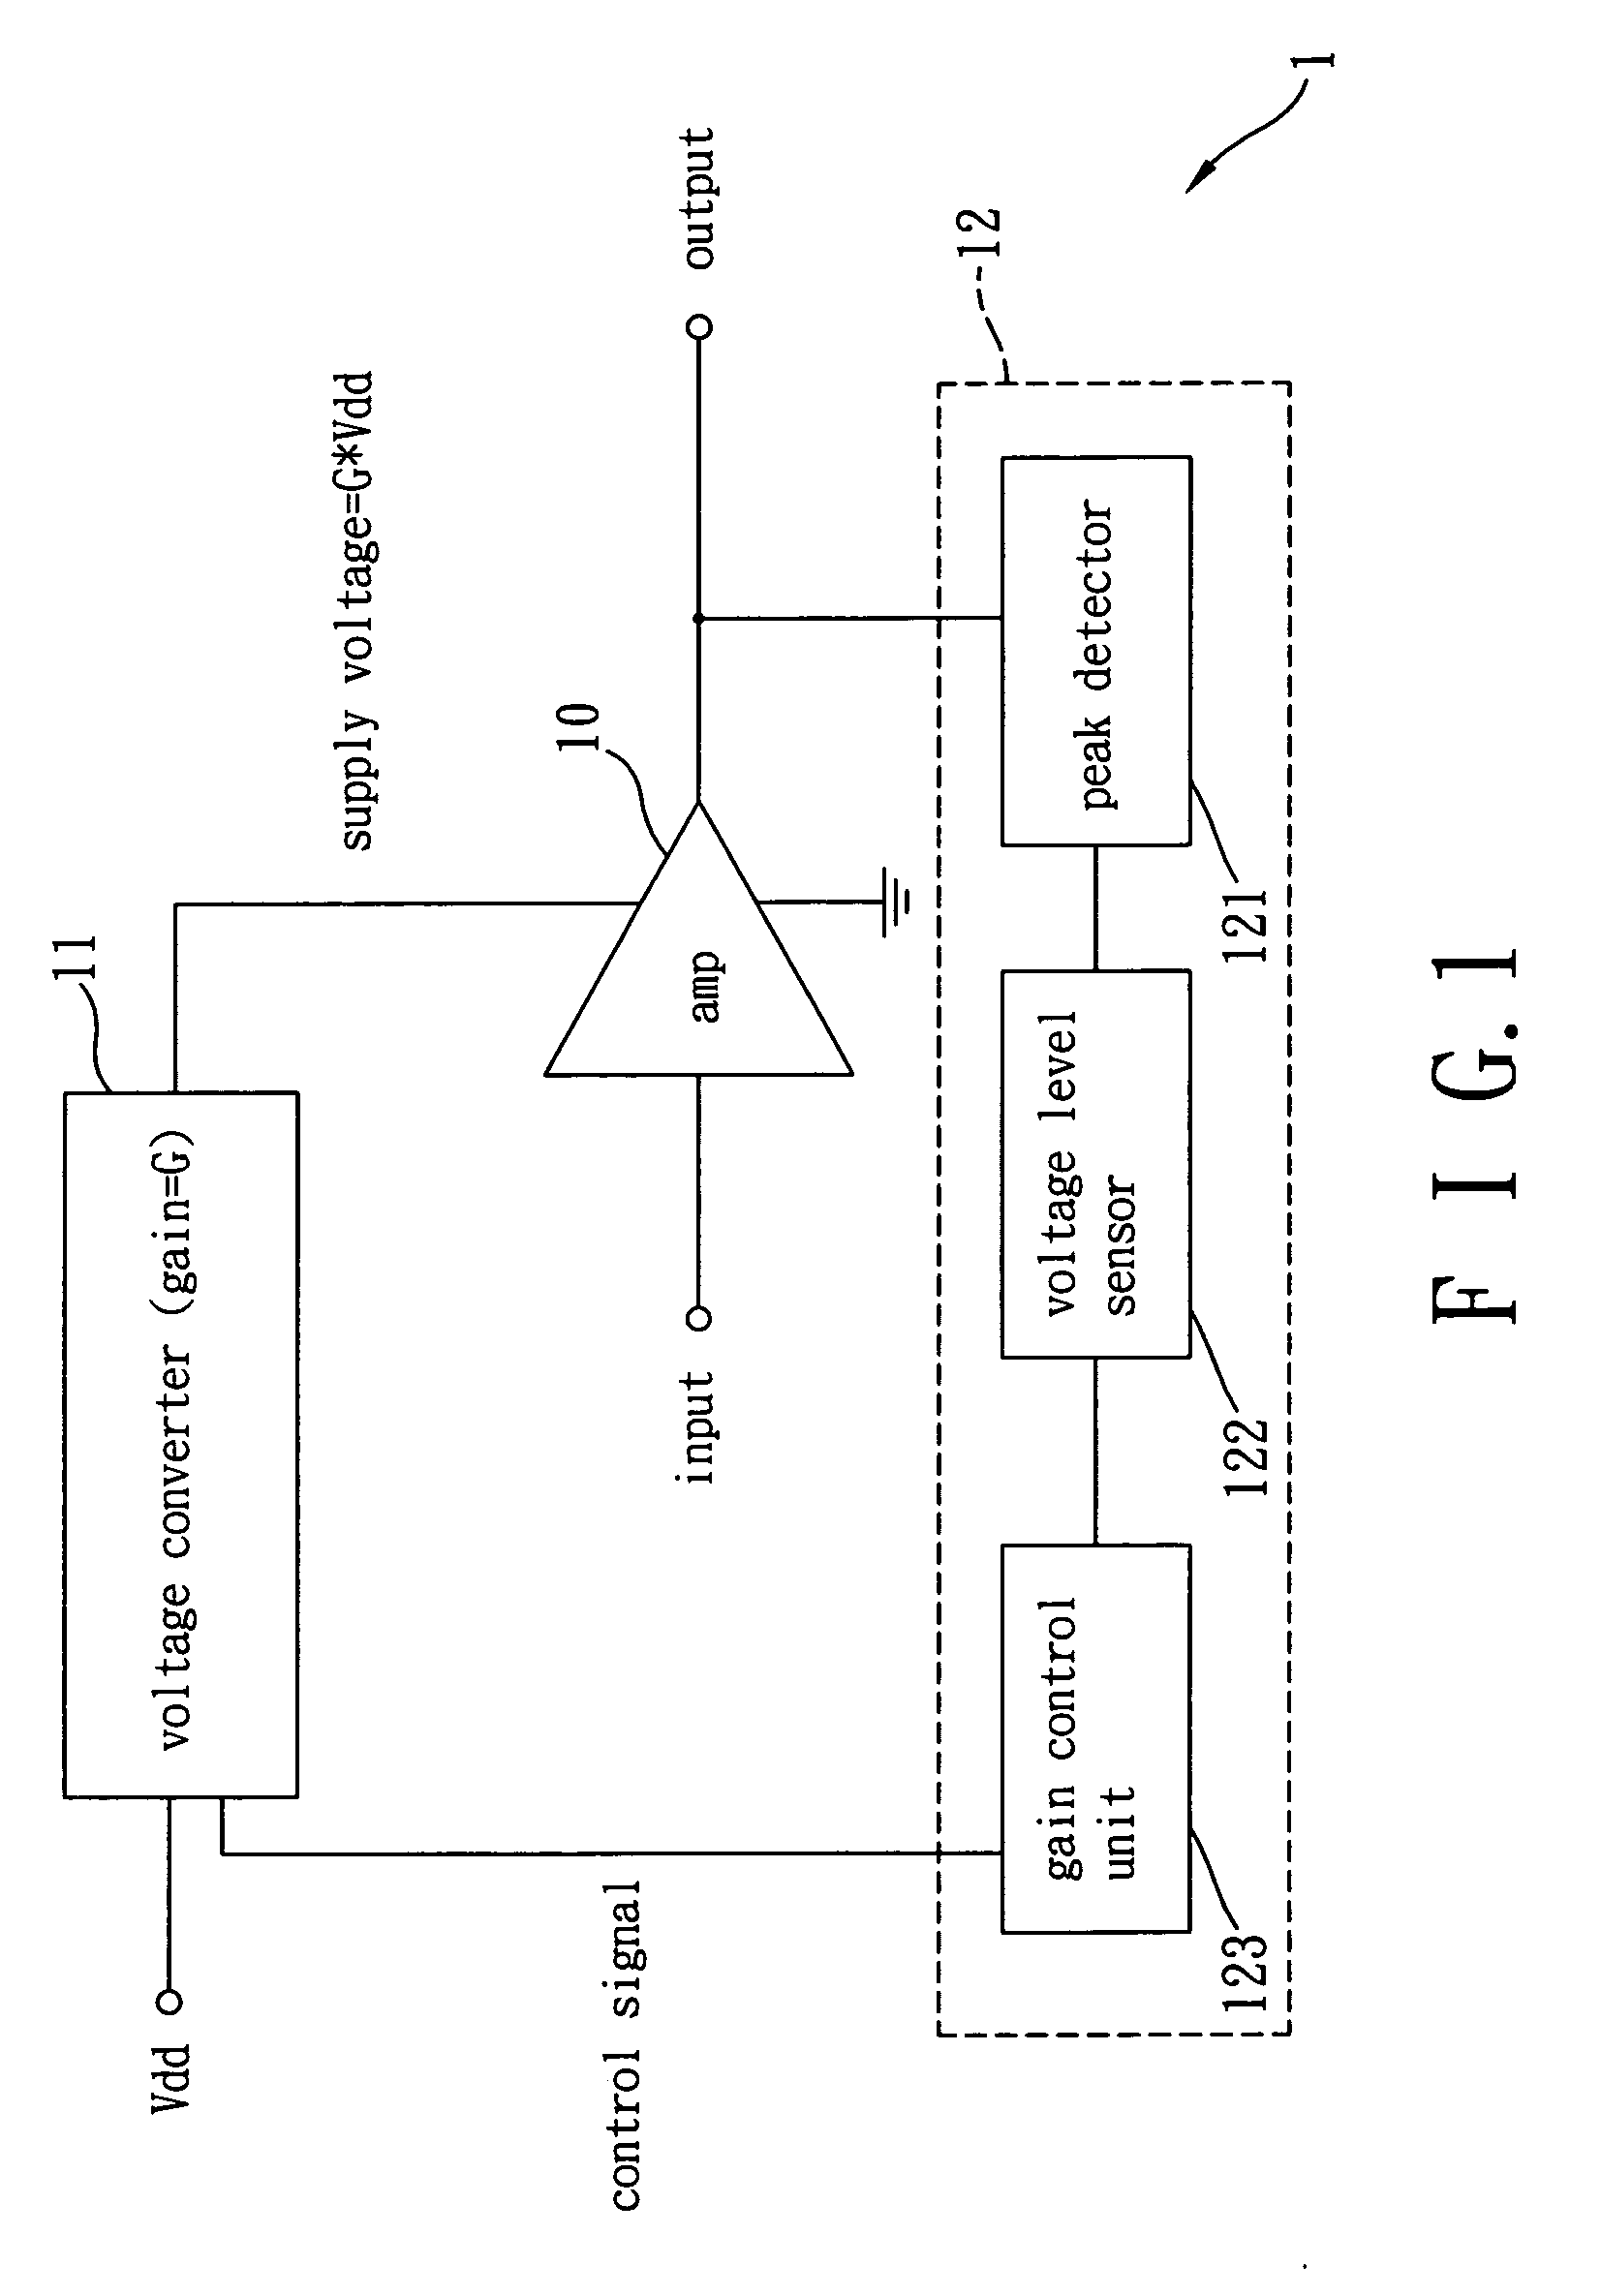 Amplifying circuit with variable supply voltage